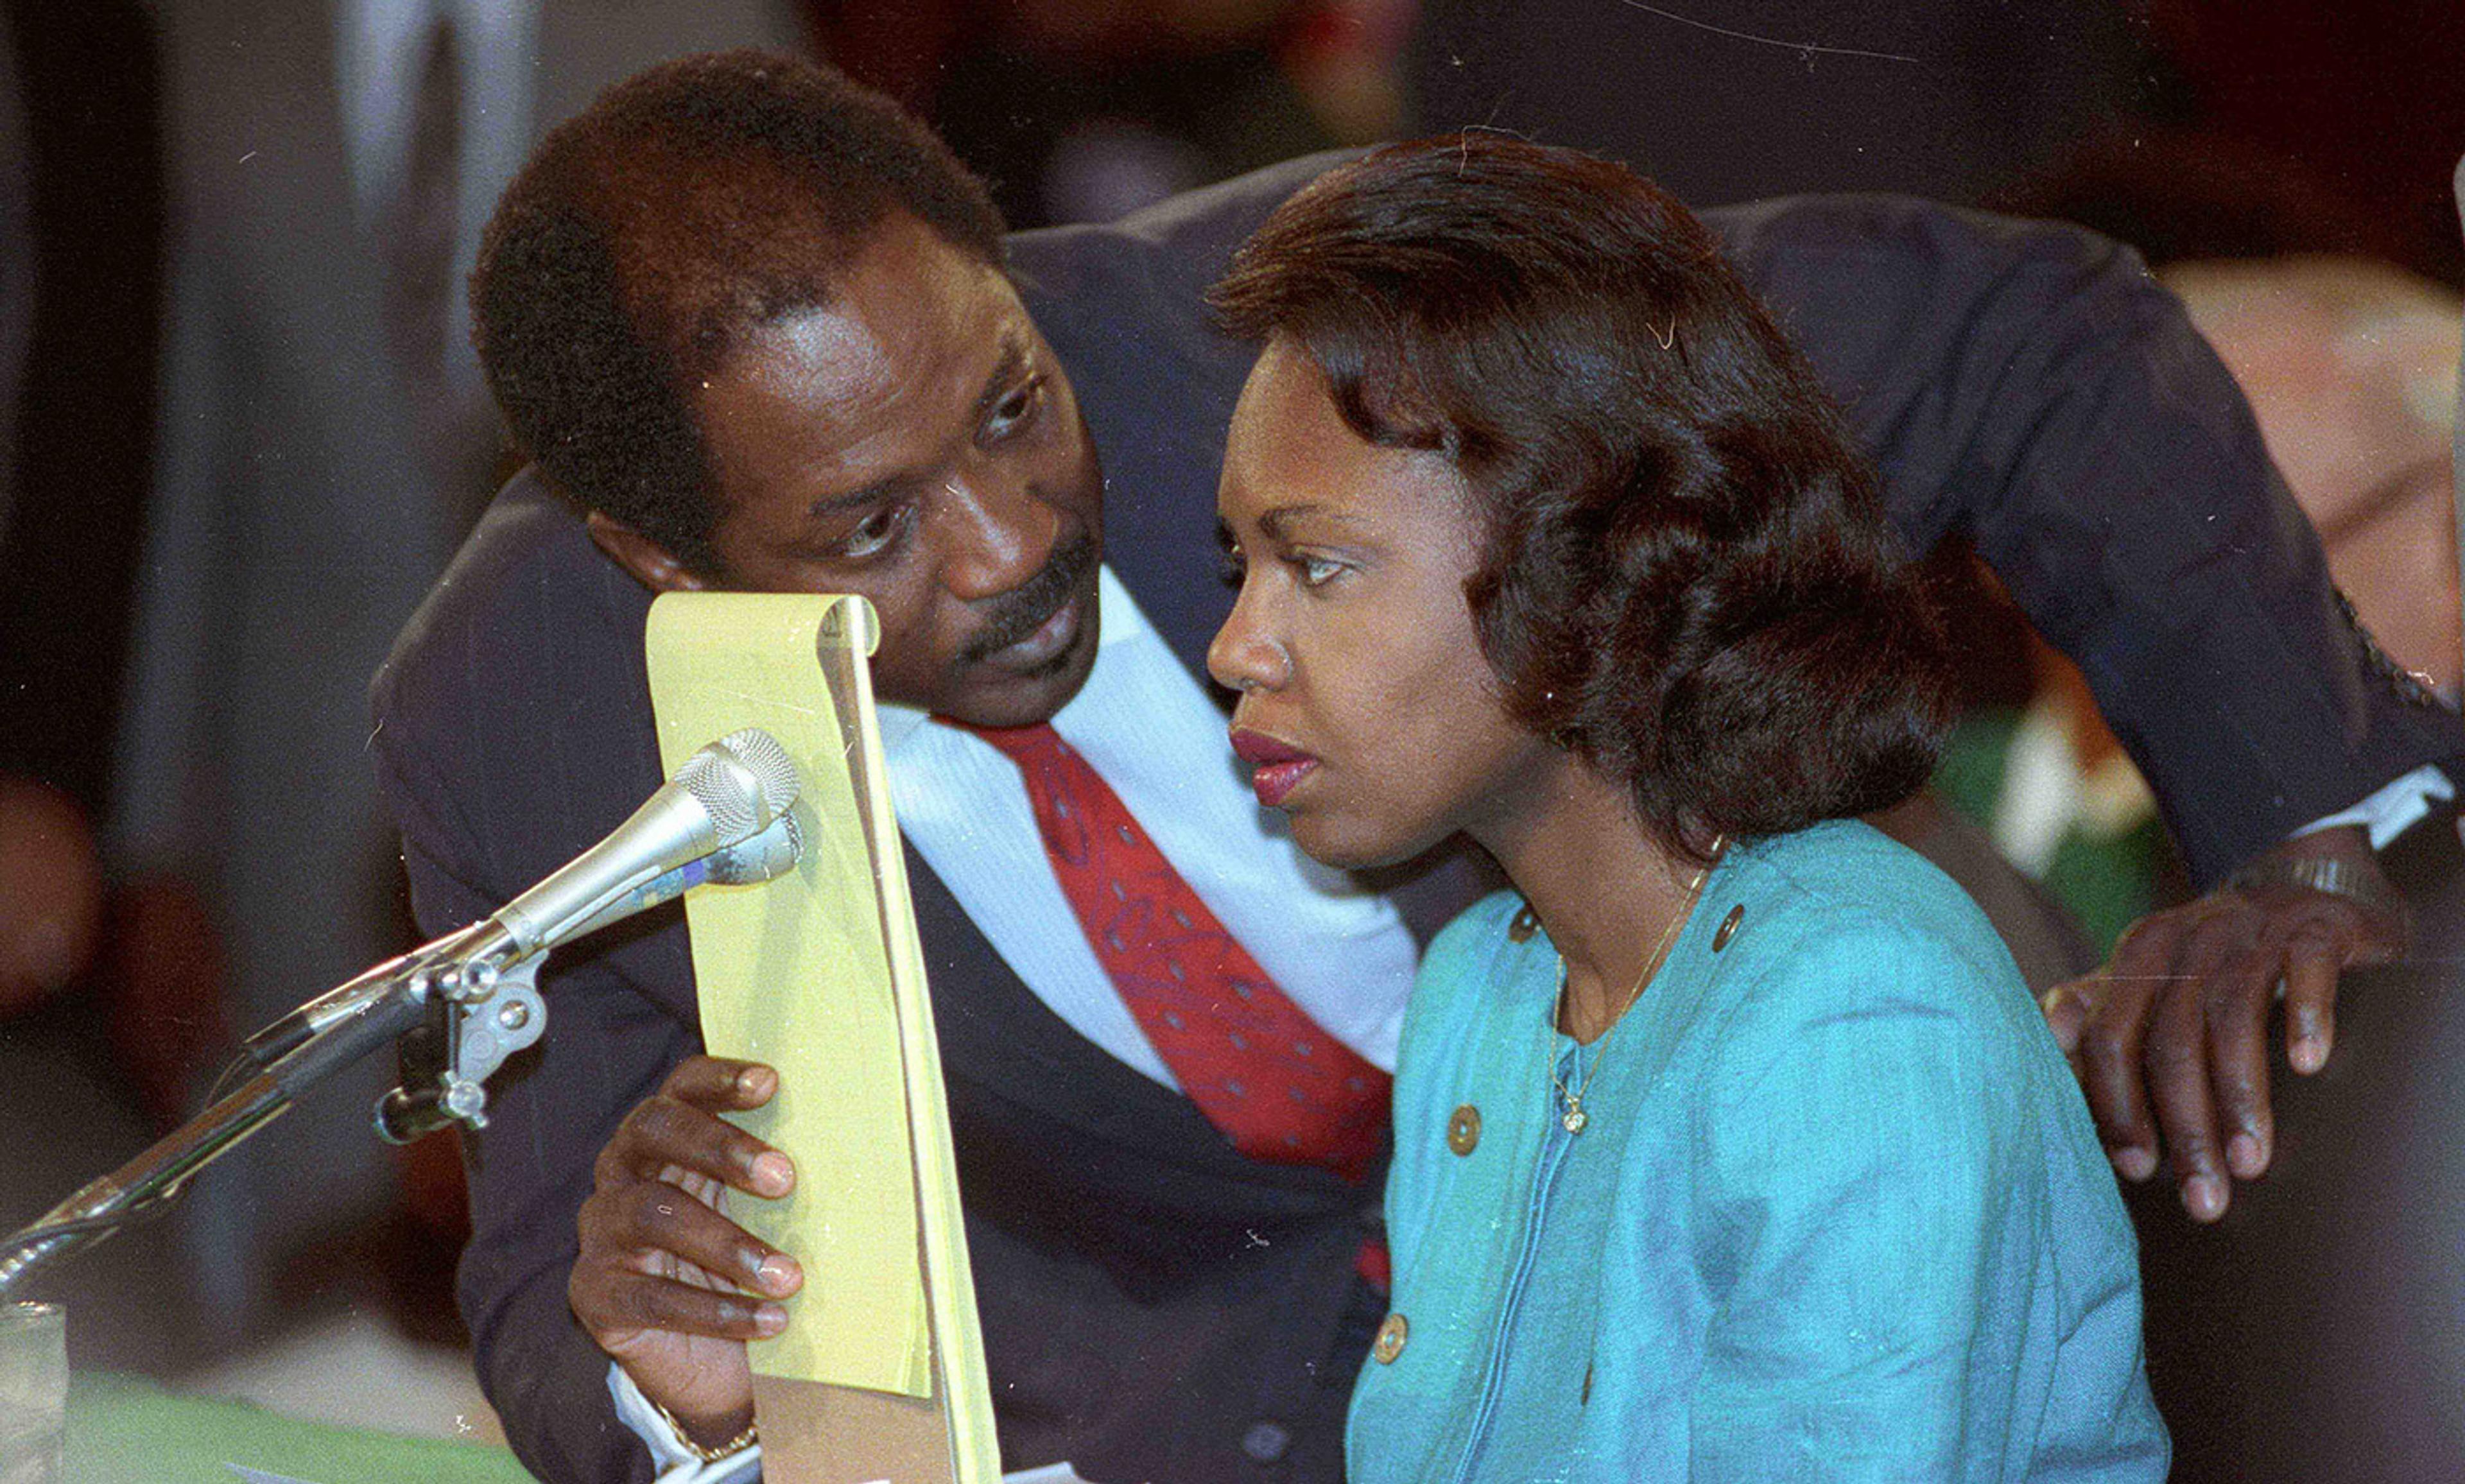 <p>Counsel Charles Ogletree advises the law professor Anita Hill during her testimony on 11 October 1991. <em>Photo by Rick Wilking/Reuters</em></p>